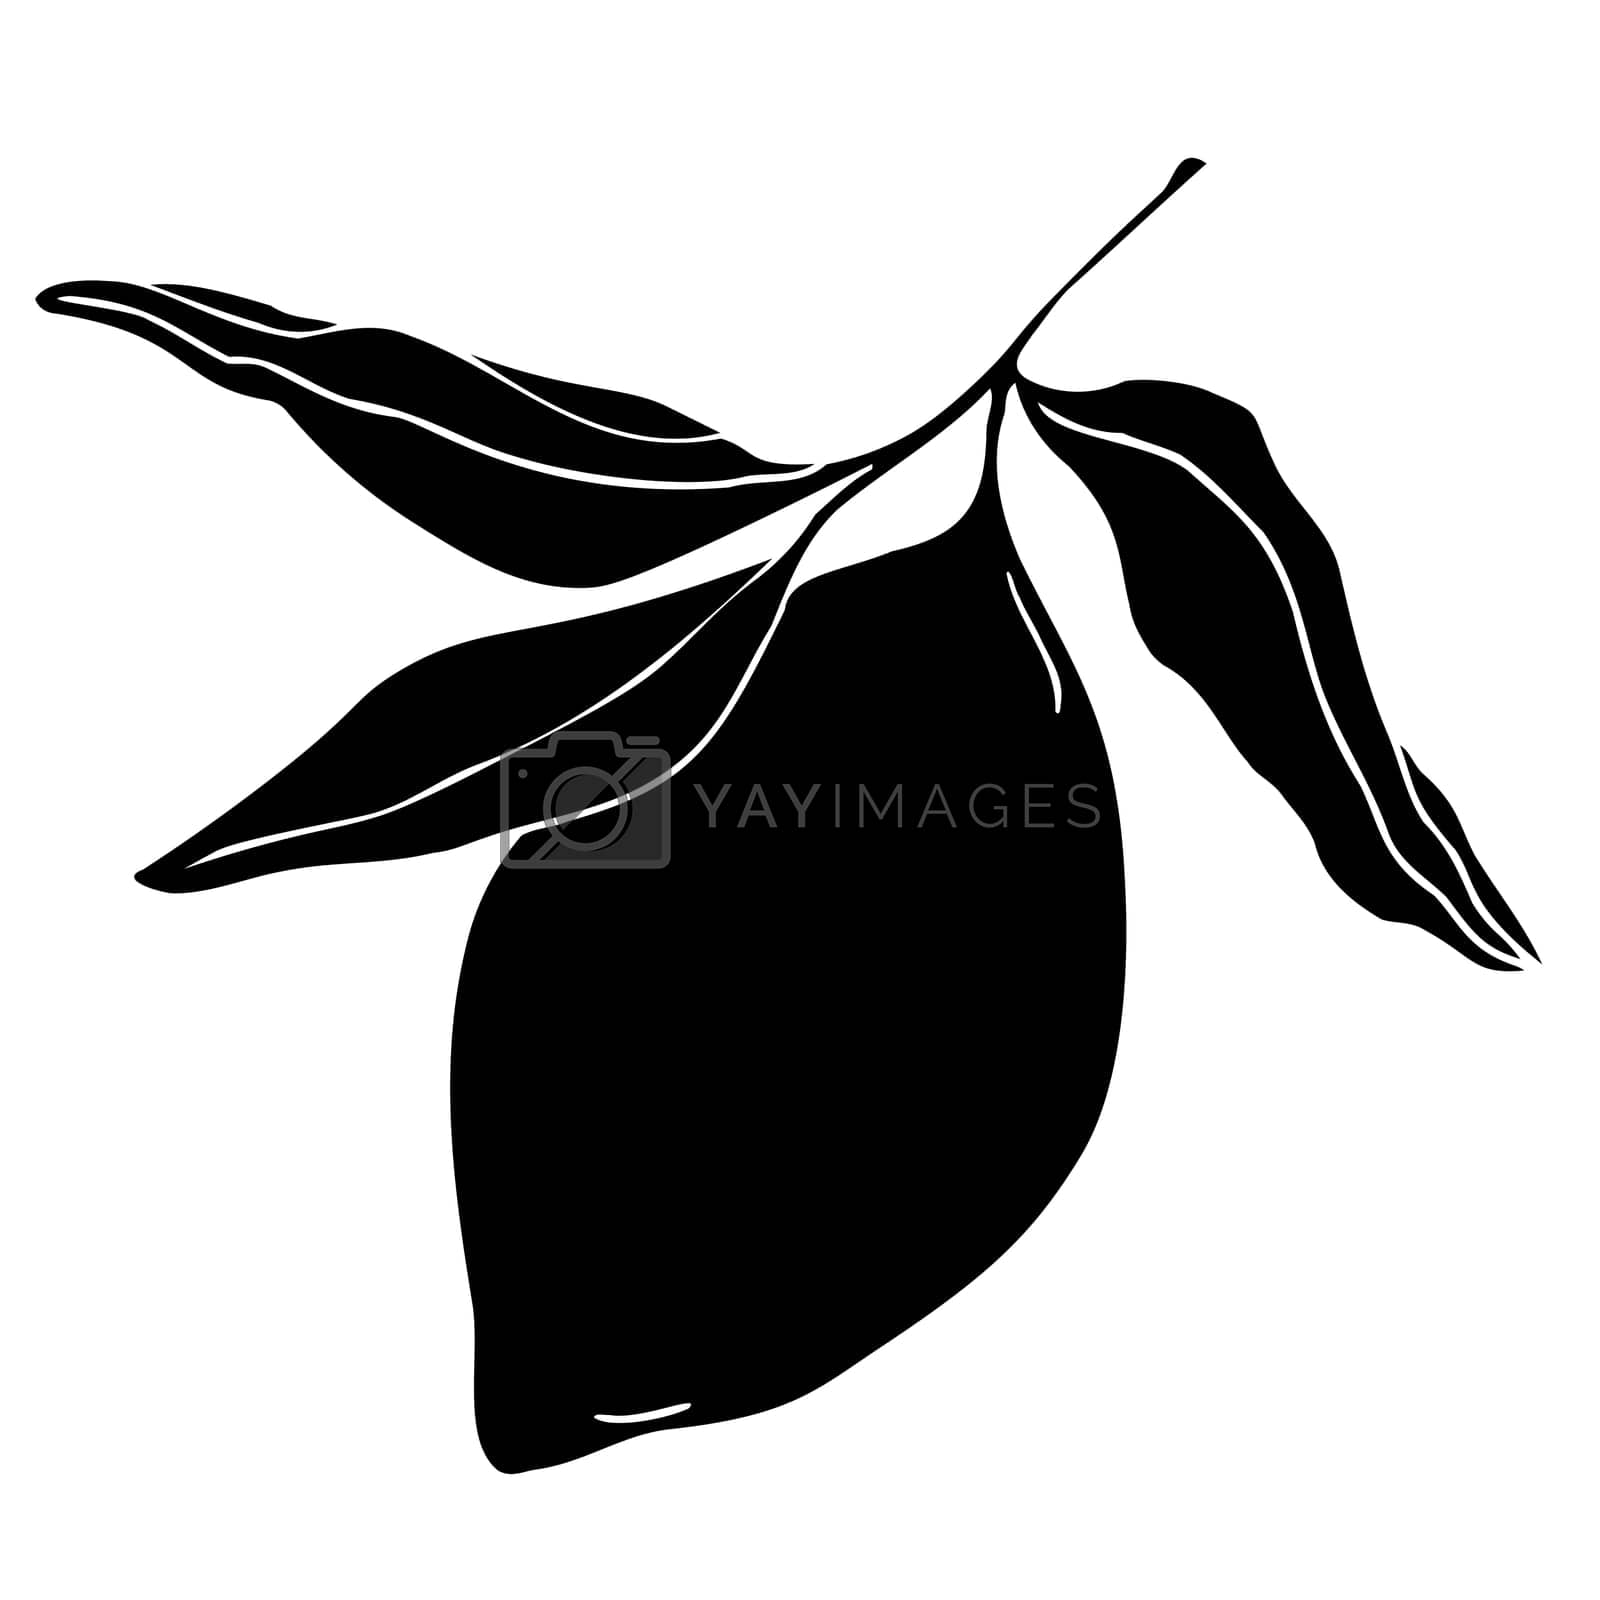 Royalty free image of Citron with leaves, silhouette summer fruit for logo design by MintanArt